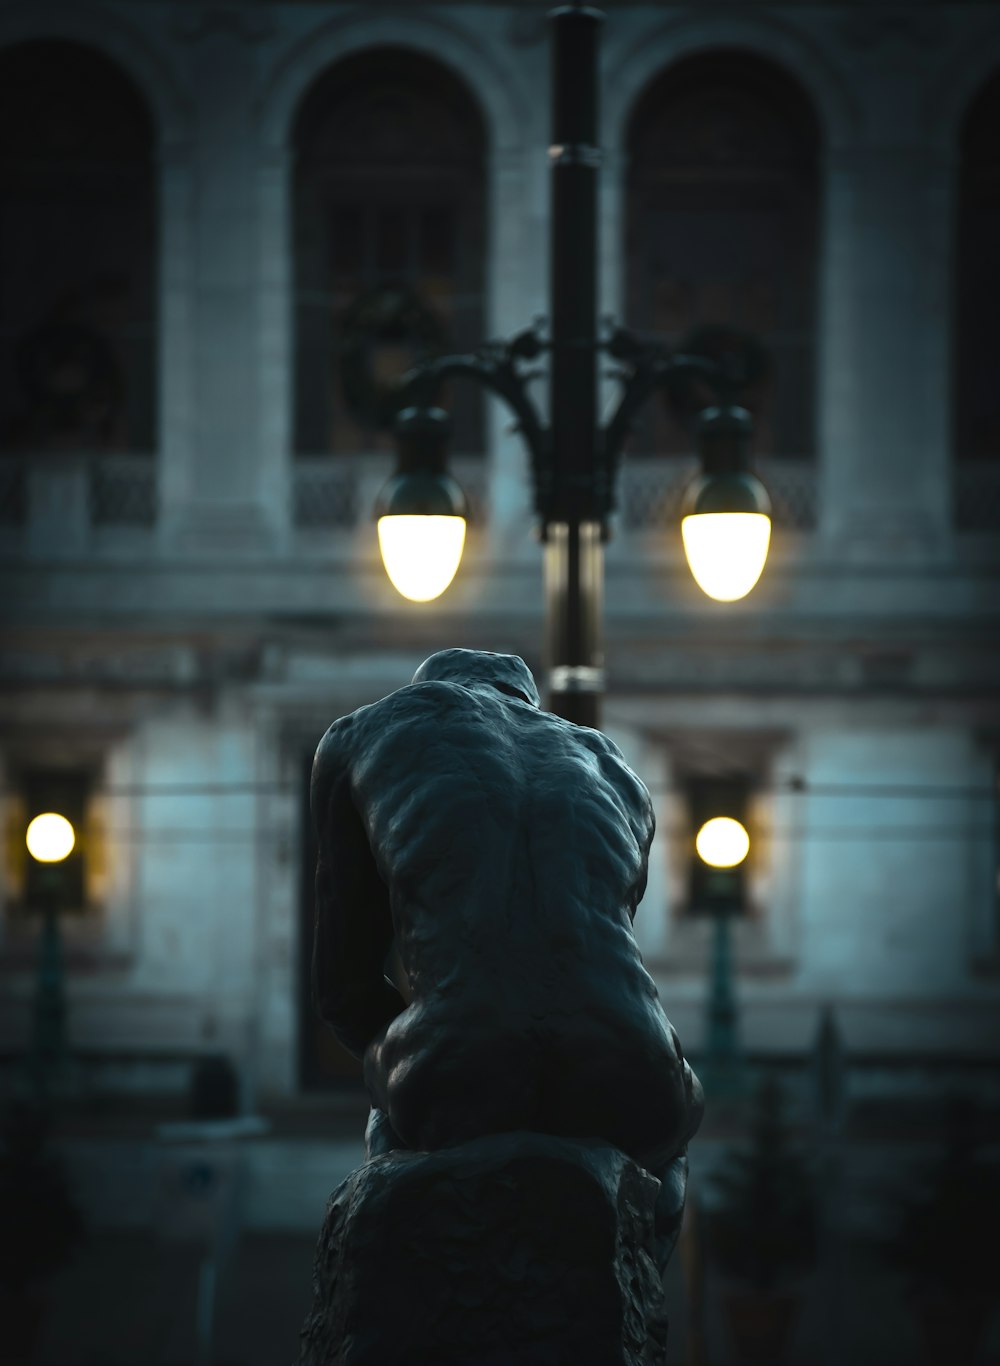 The Thinker statue near lighted street lamp during night time